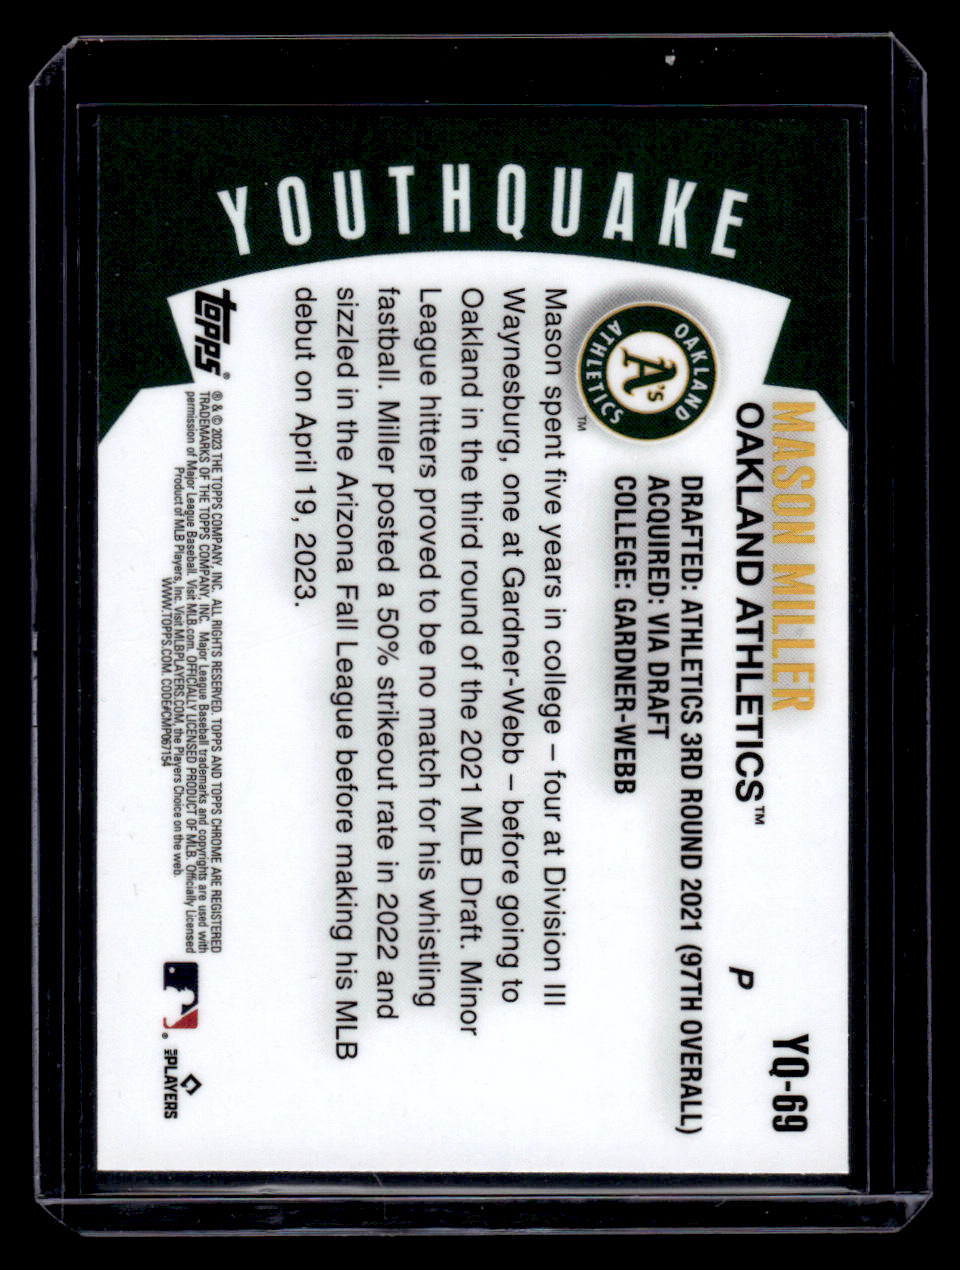 2023 Topps Chrome Update Mason Miller Youthquake Rookie Refractor YQ-6 –  Sportscard Superstore